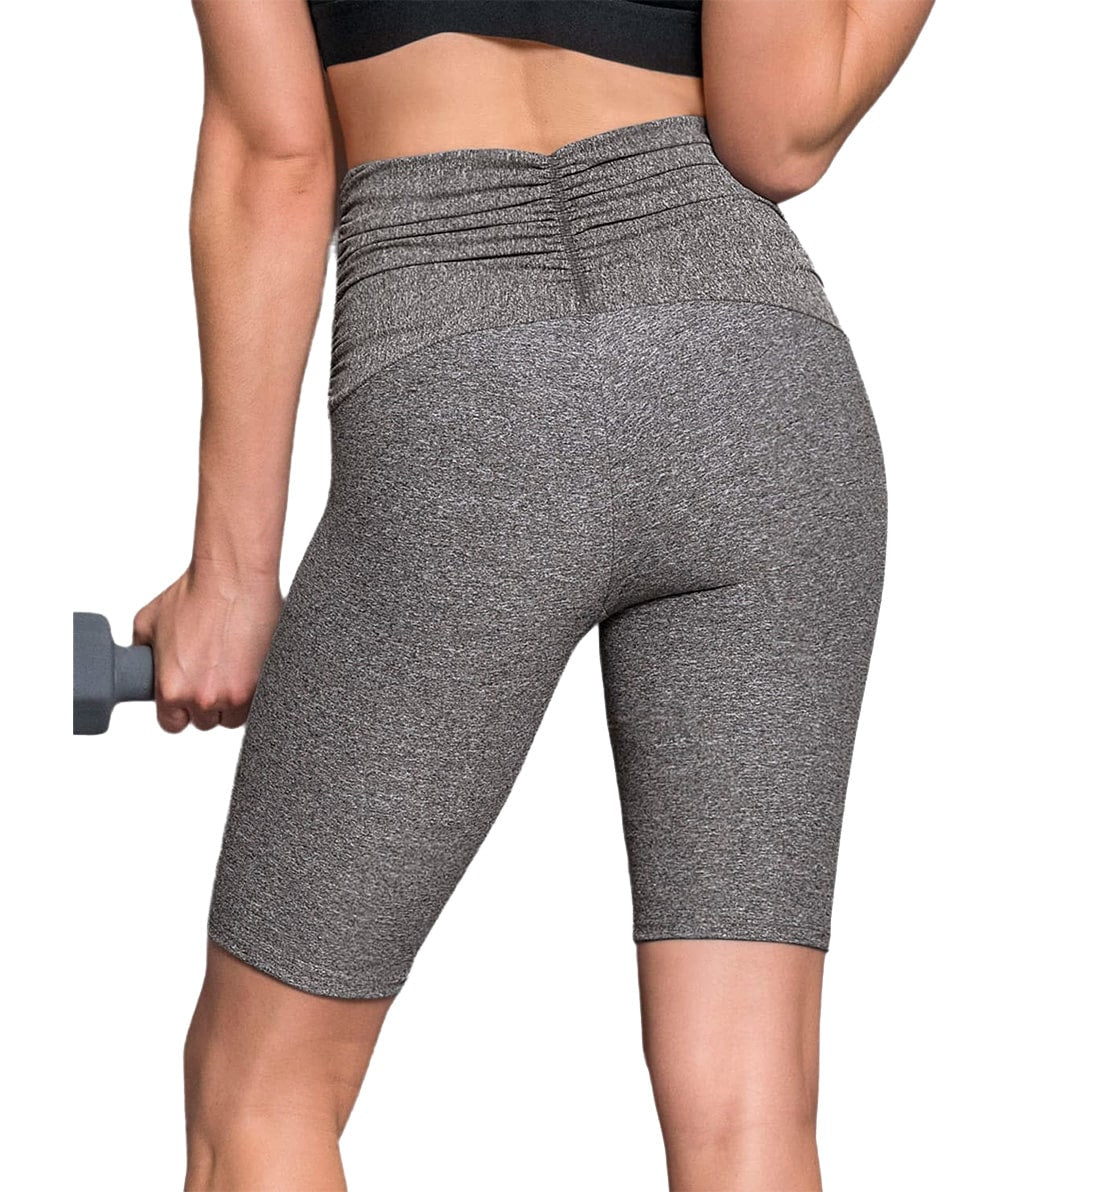 Leonisa ActiveLife Layover Ruched Mid-Thigh Shaper Short (196005N),Small,Gray - Gray,Small